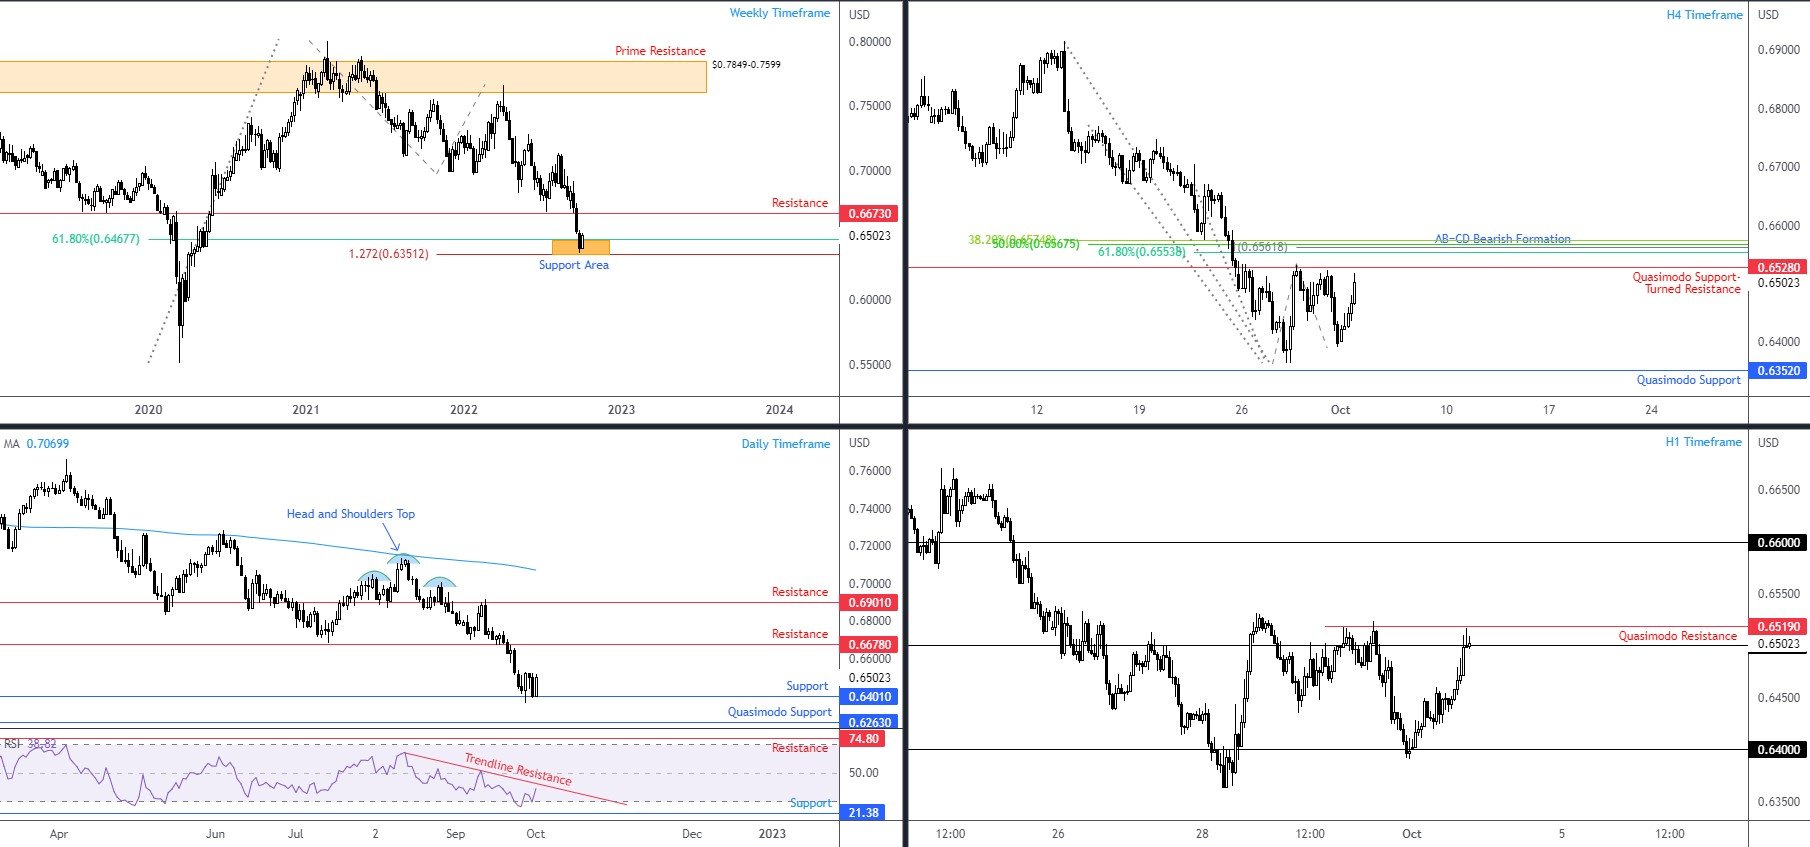 Technical View for 4th October: Pound Higher Though Faces Obvious Weekly Resistance at $1.1751-1.1413, FP Markets